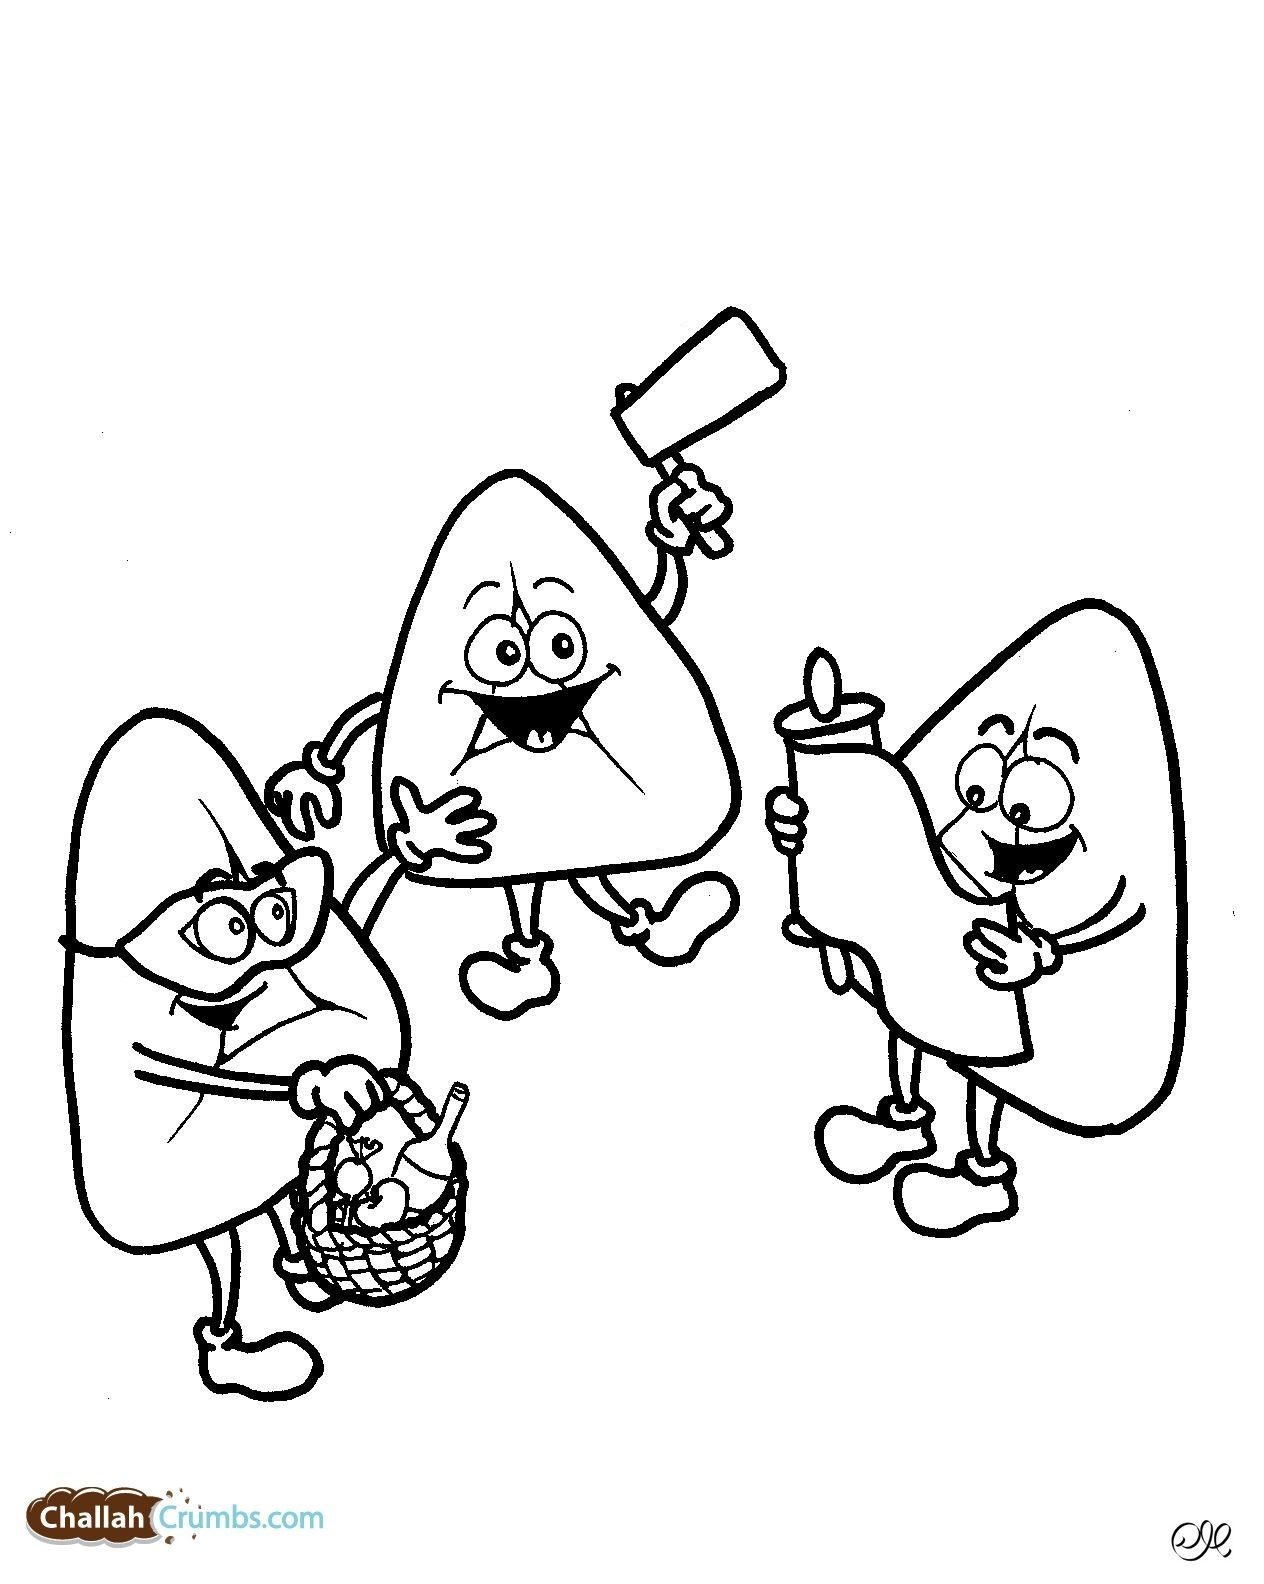 Purim Coloring Page Fresh Silly Hamantaschen Celebrate Purim Ask Your Children To